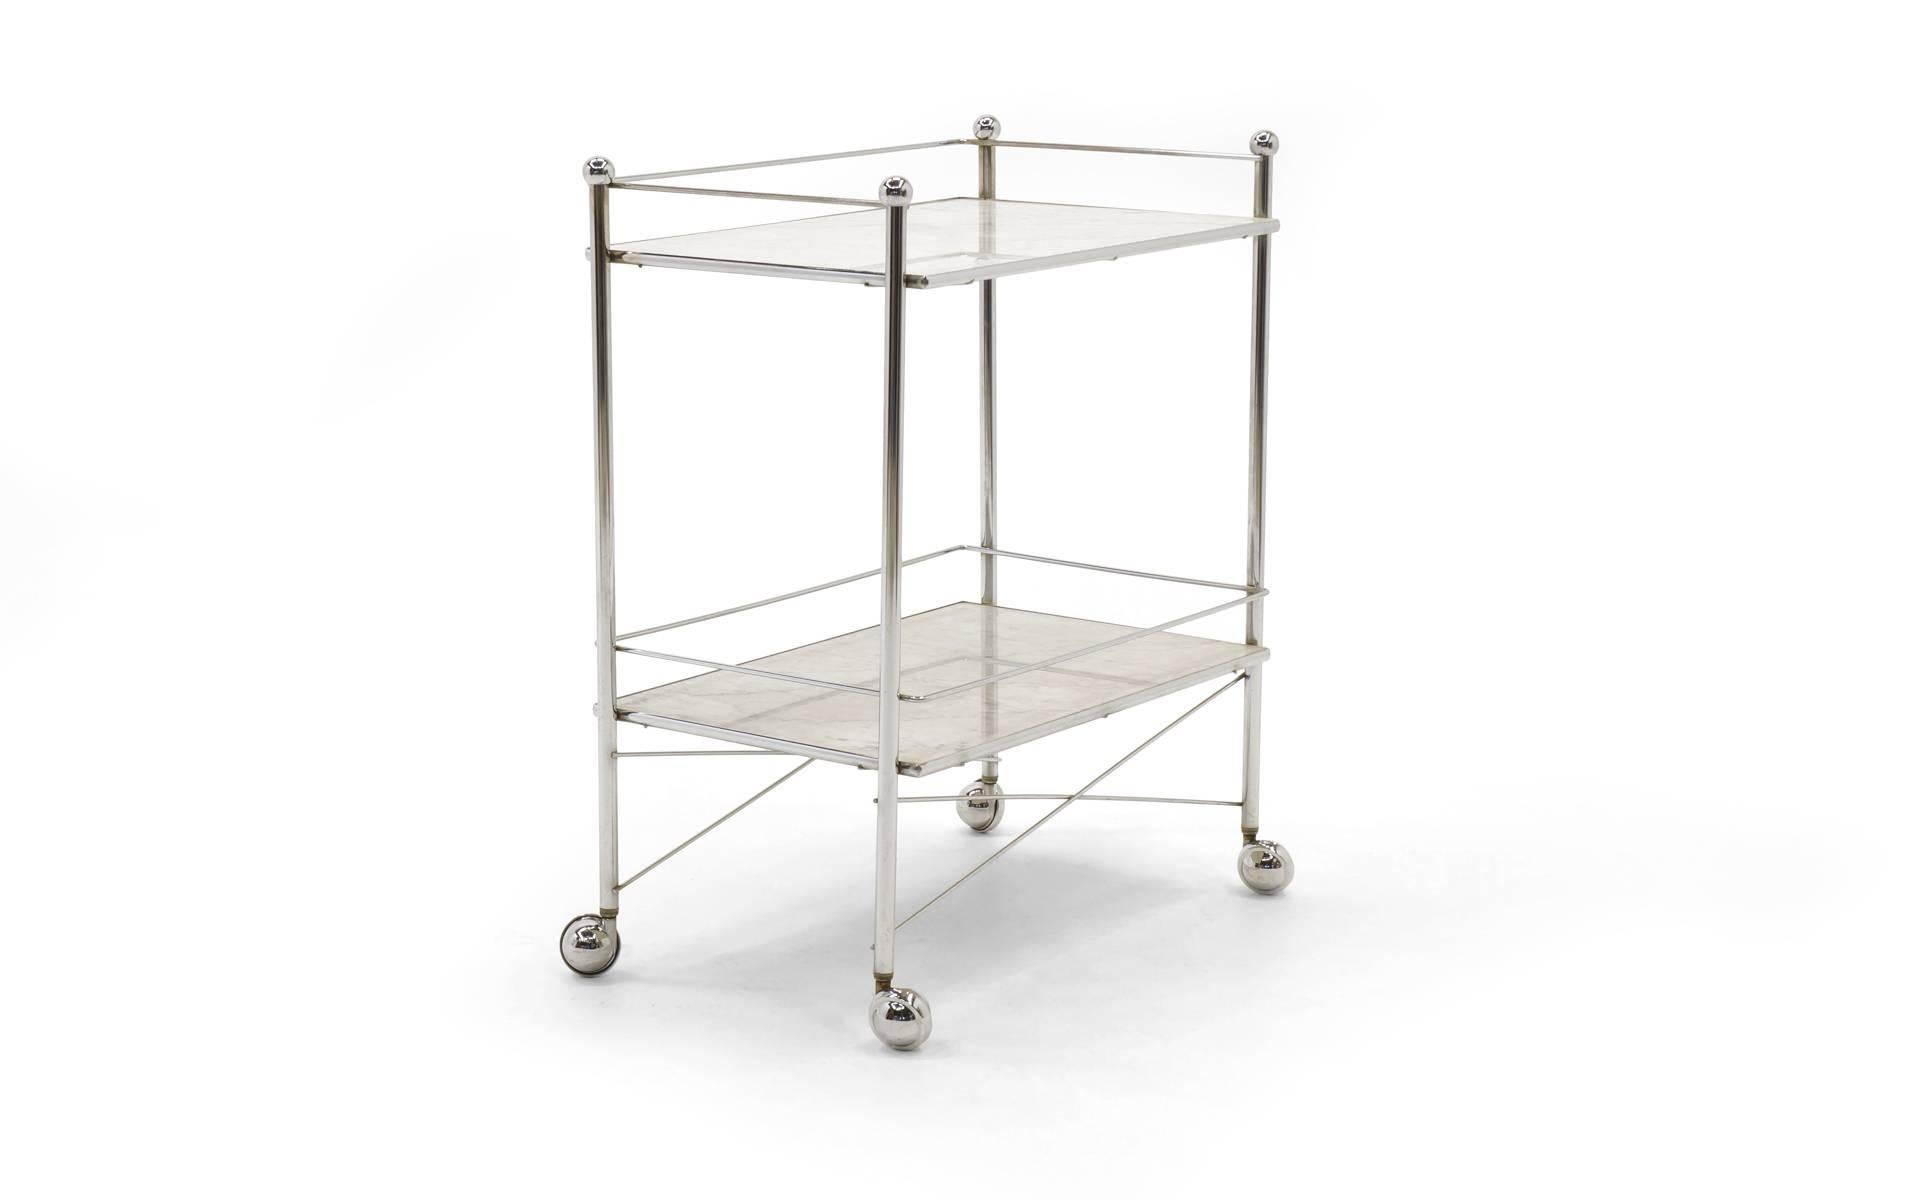 Simple, elegant serving cart. Chromed steel frame on the original chrome casters and white Italian marble shelves.  Great scale for the dining room or kitchen